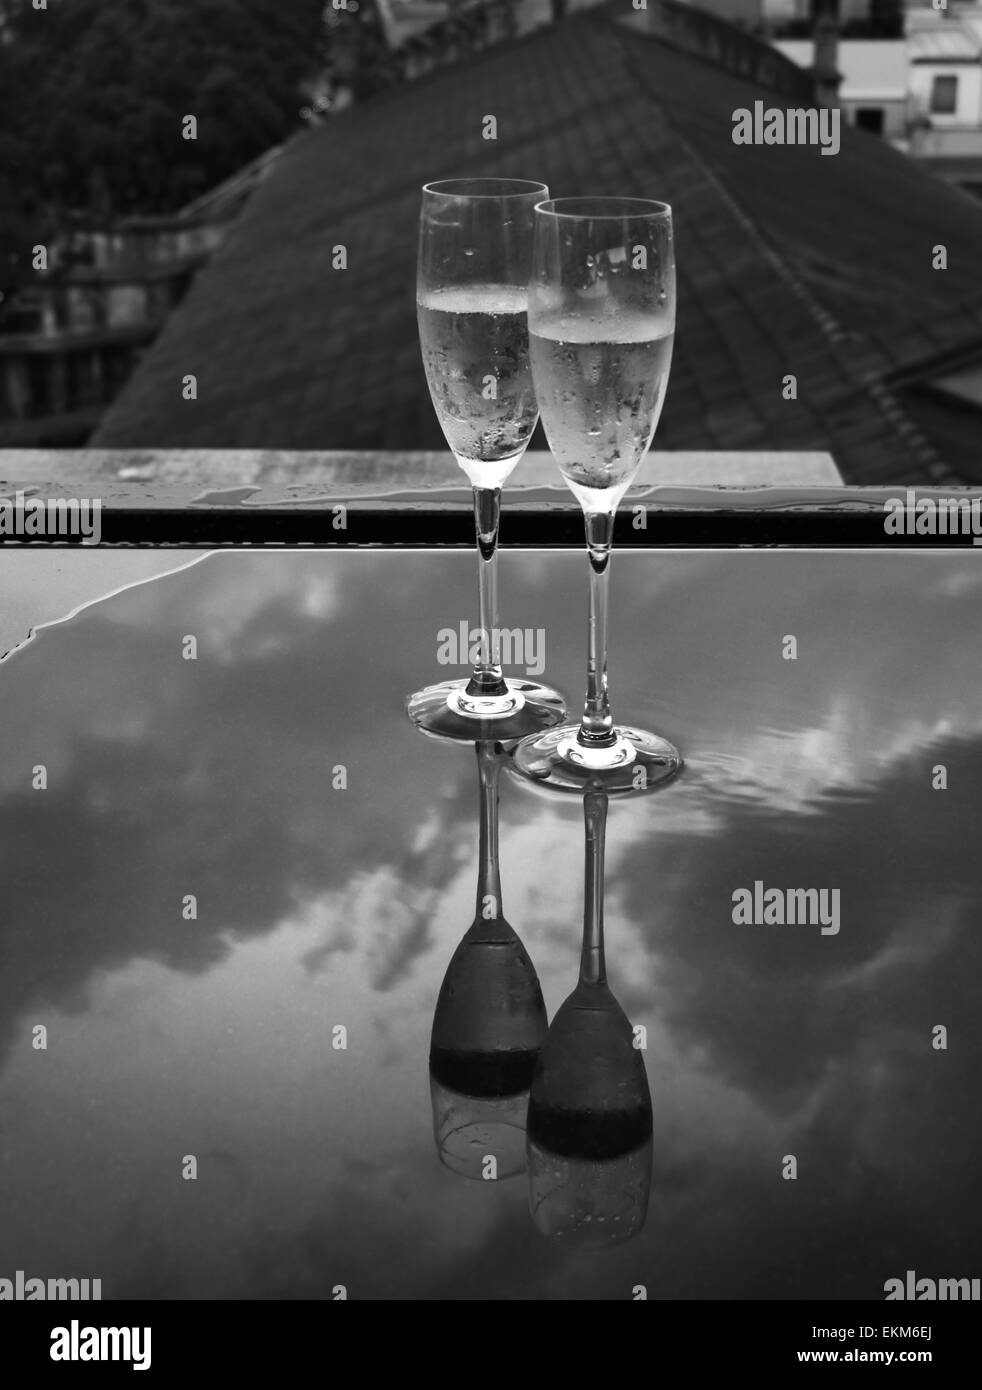 Champagne glasses on a table in the rain with reflections Stock Photo